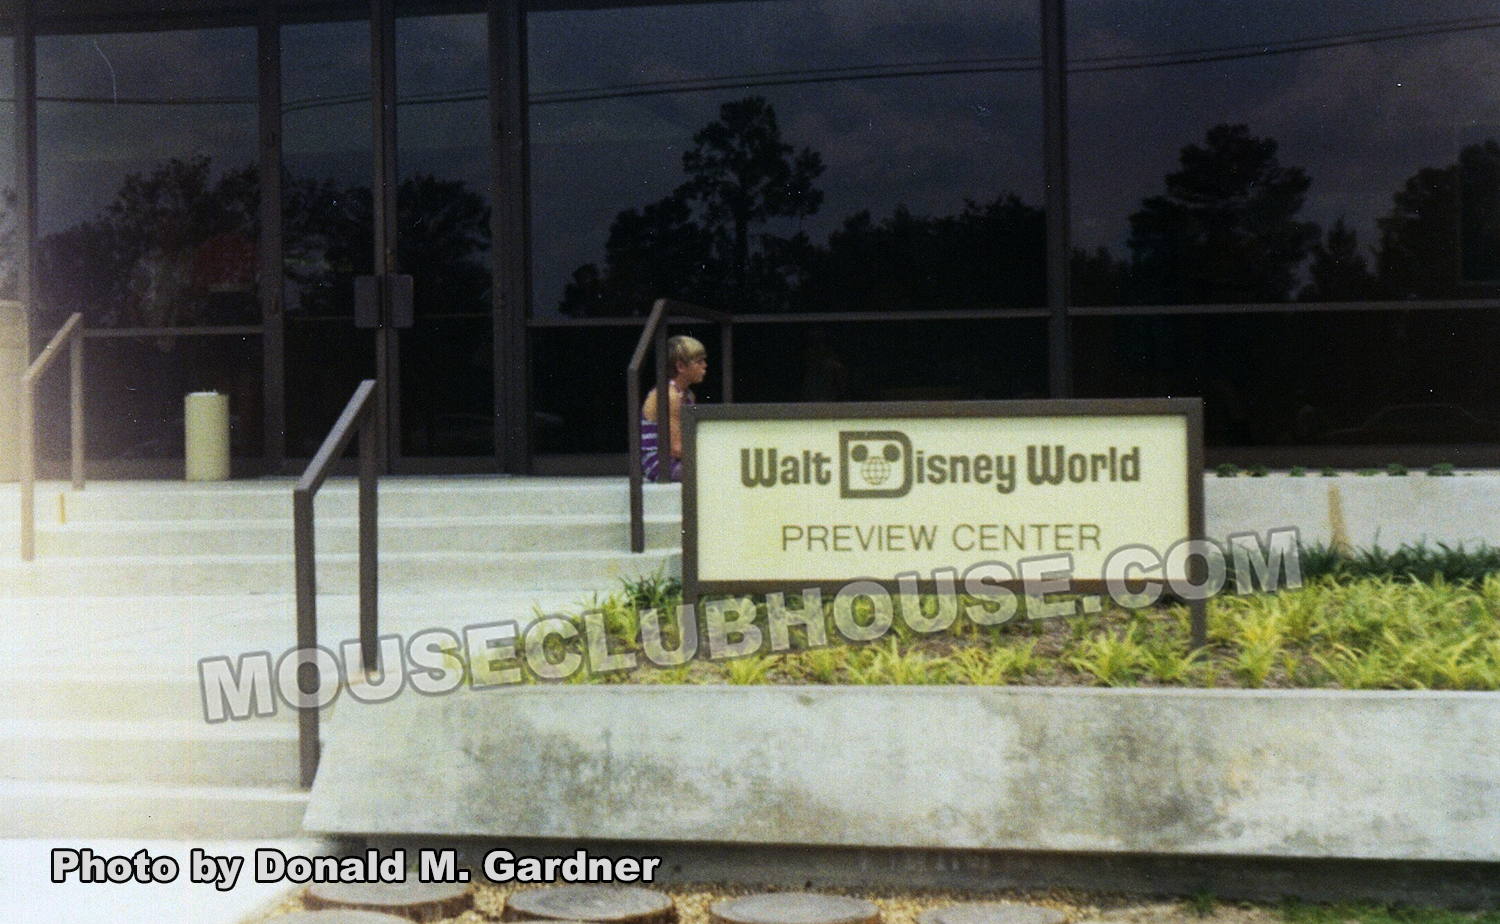 Walt Disney World Preview Center was established so the public could get a glimpse of the resort to come.